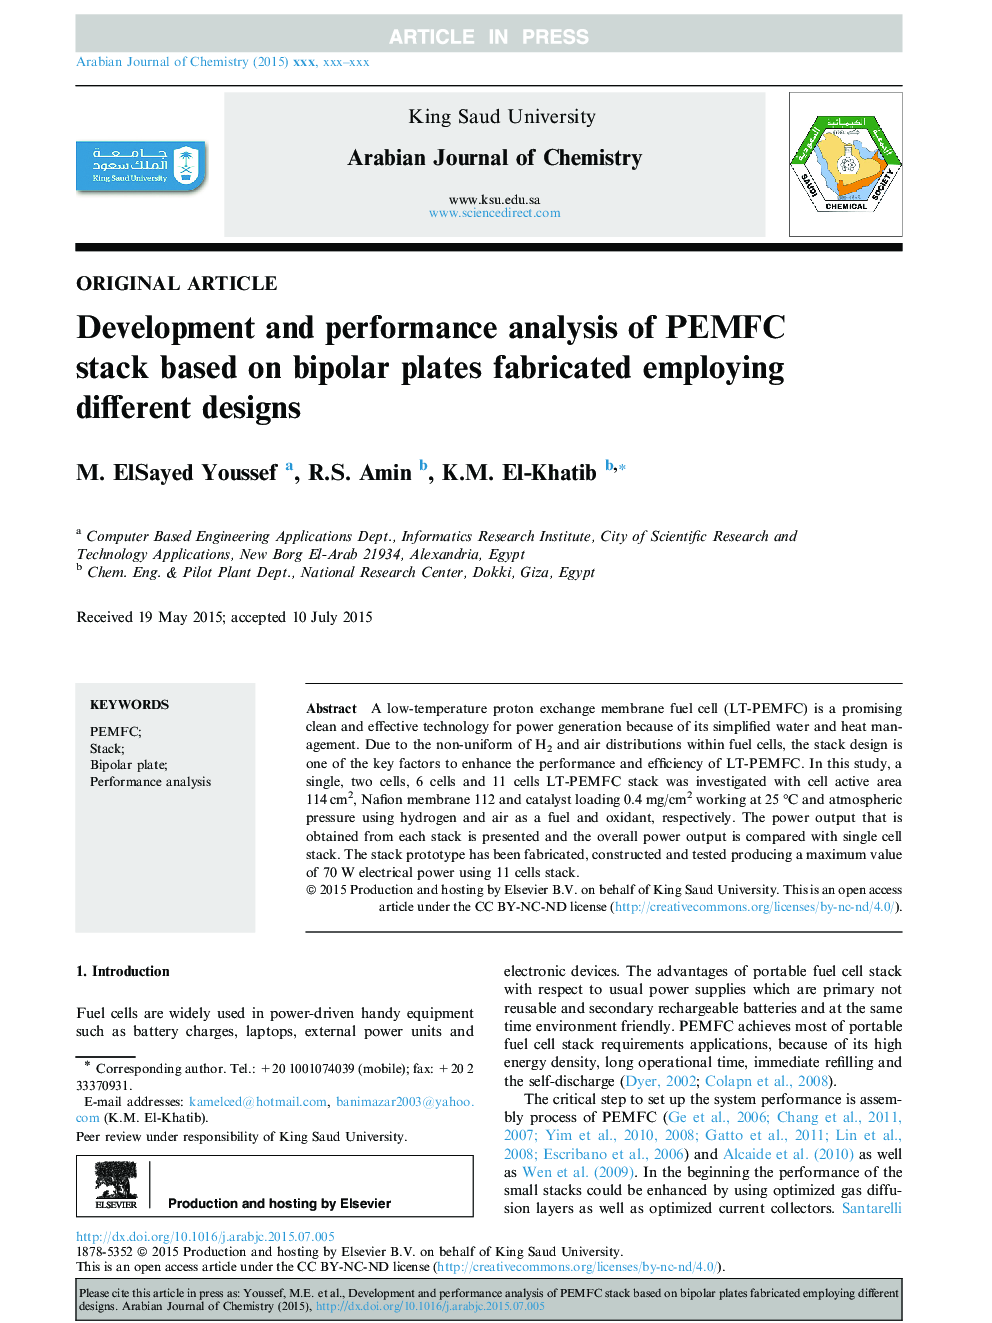 Development and performance analysis of PEMFC stack based on bipolar plates fabricated employing different designs